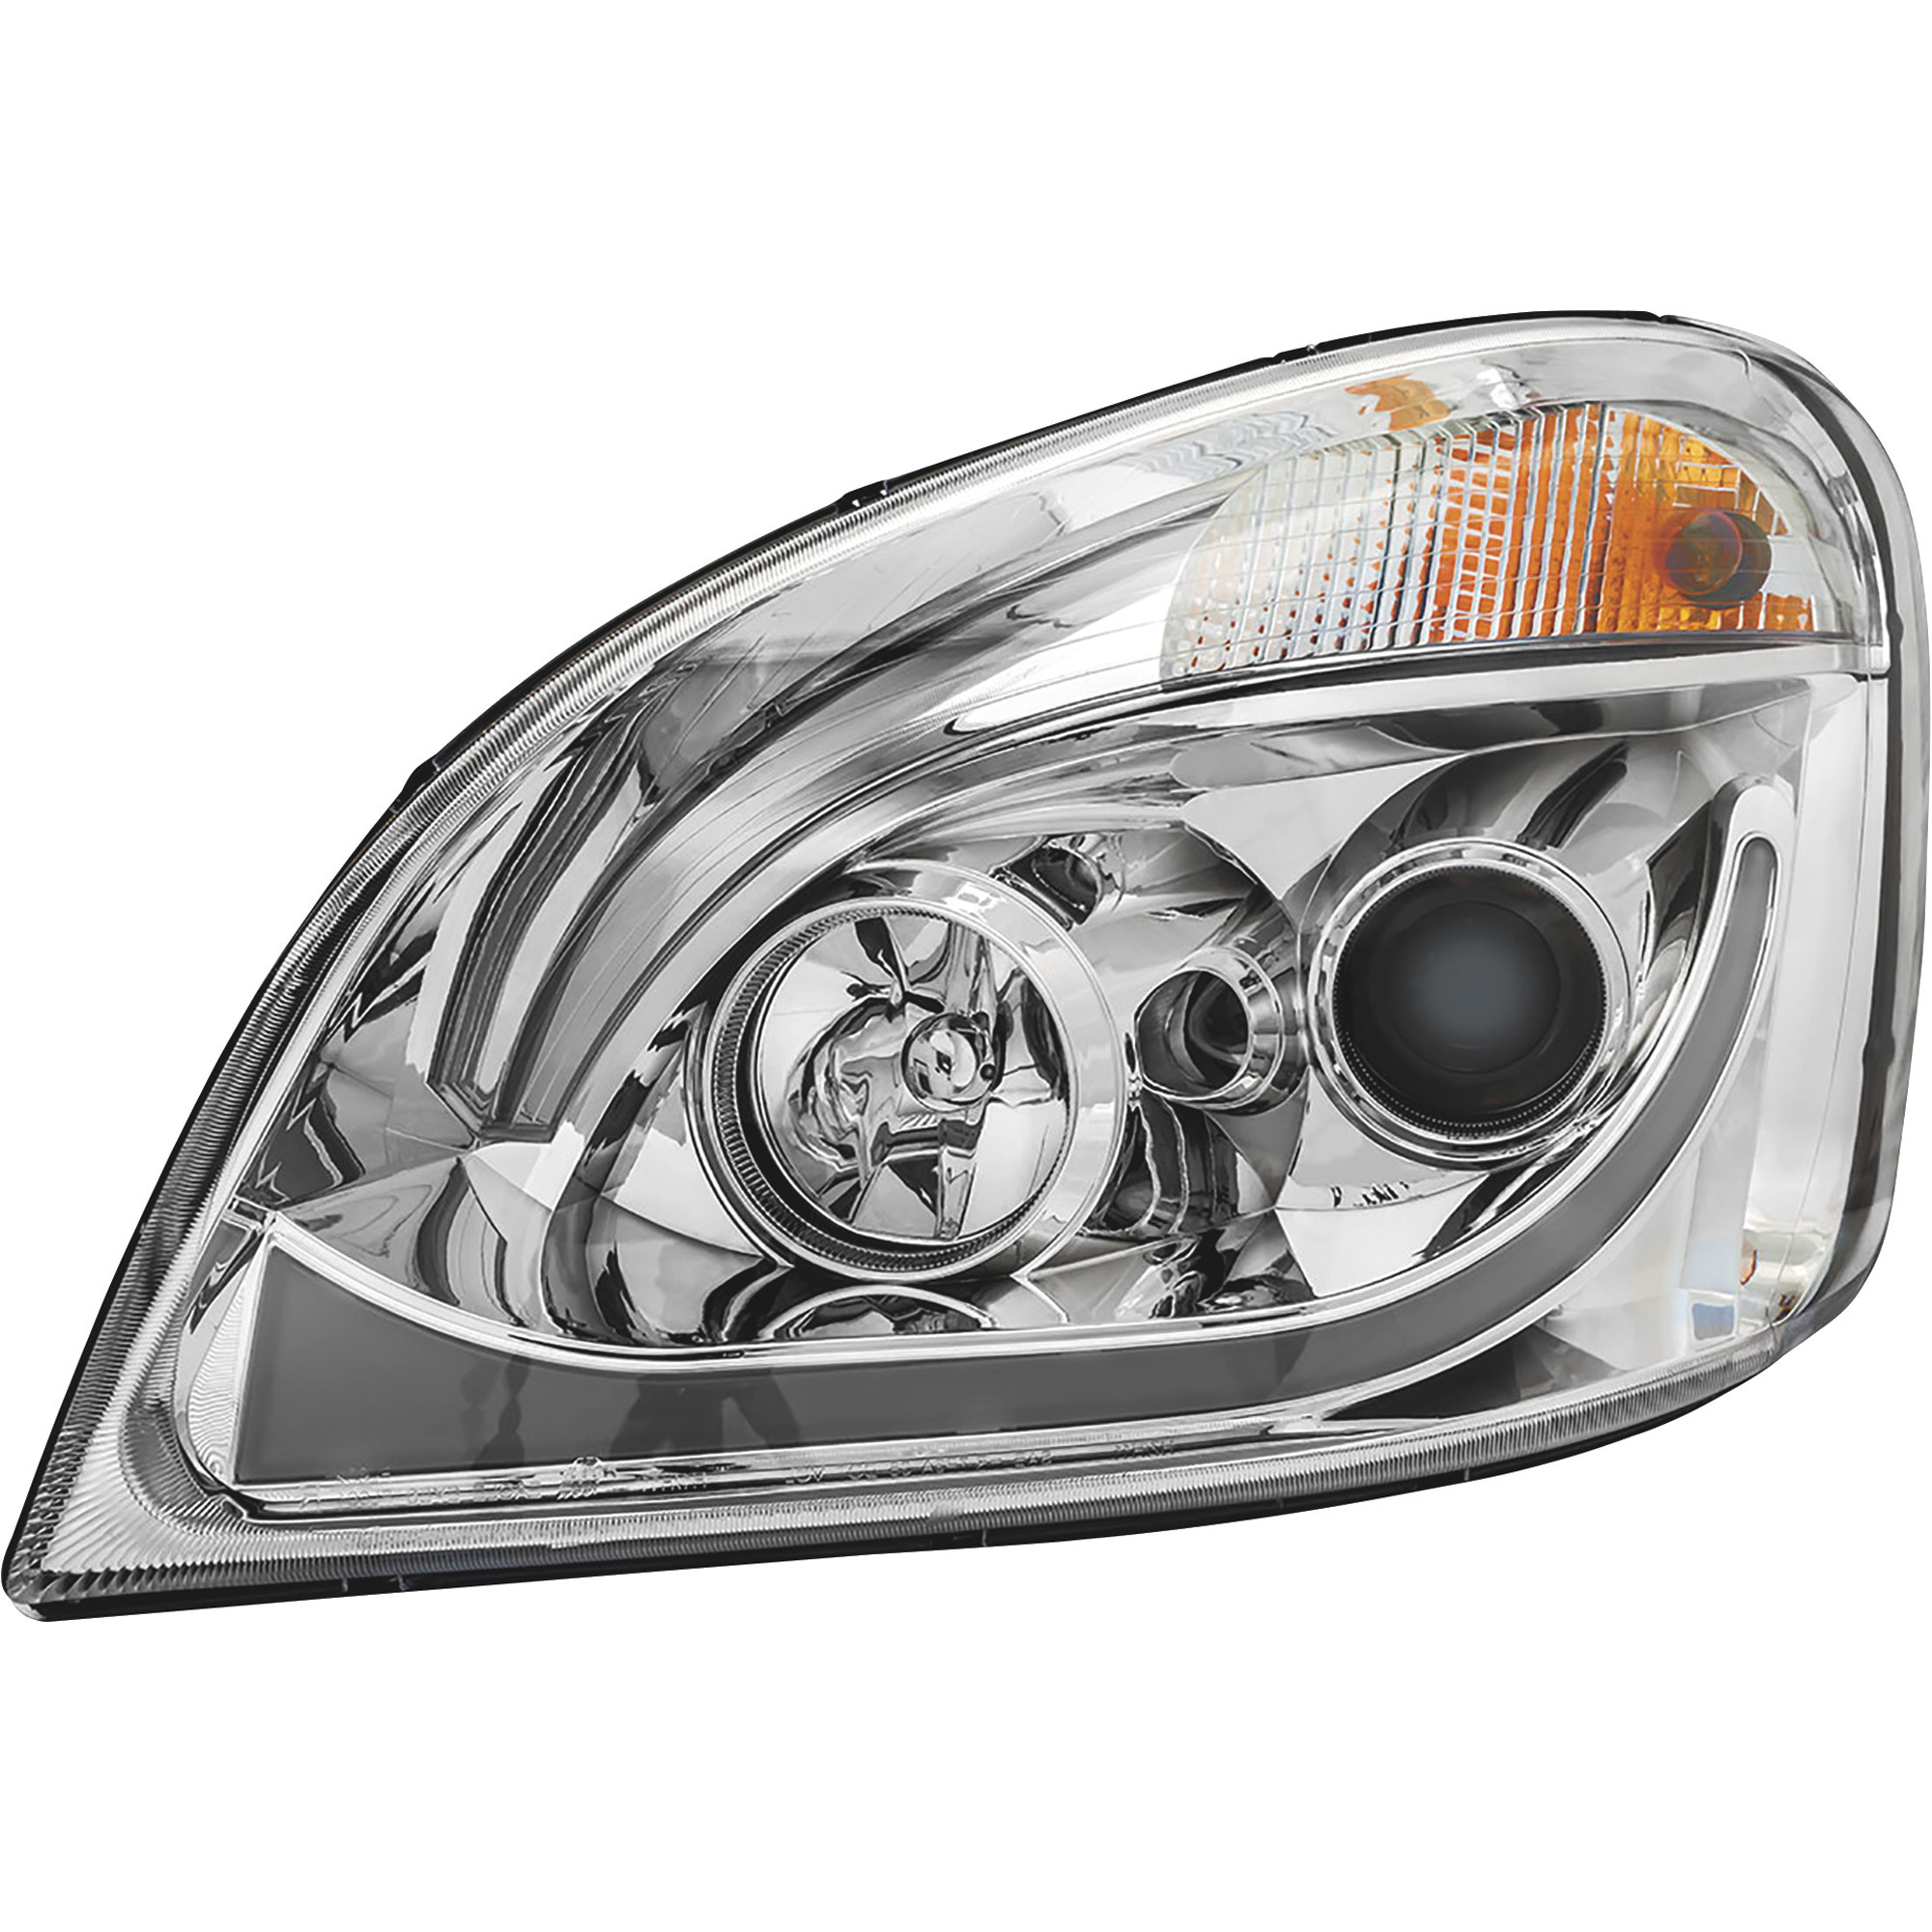 Trux Accessories Freightliner Cascadia LED Projector Headlight Assembly with LED Strip â Driver's Side, Chrome, Model TLED-H66